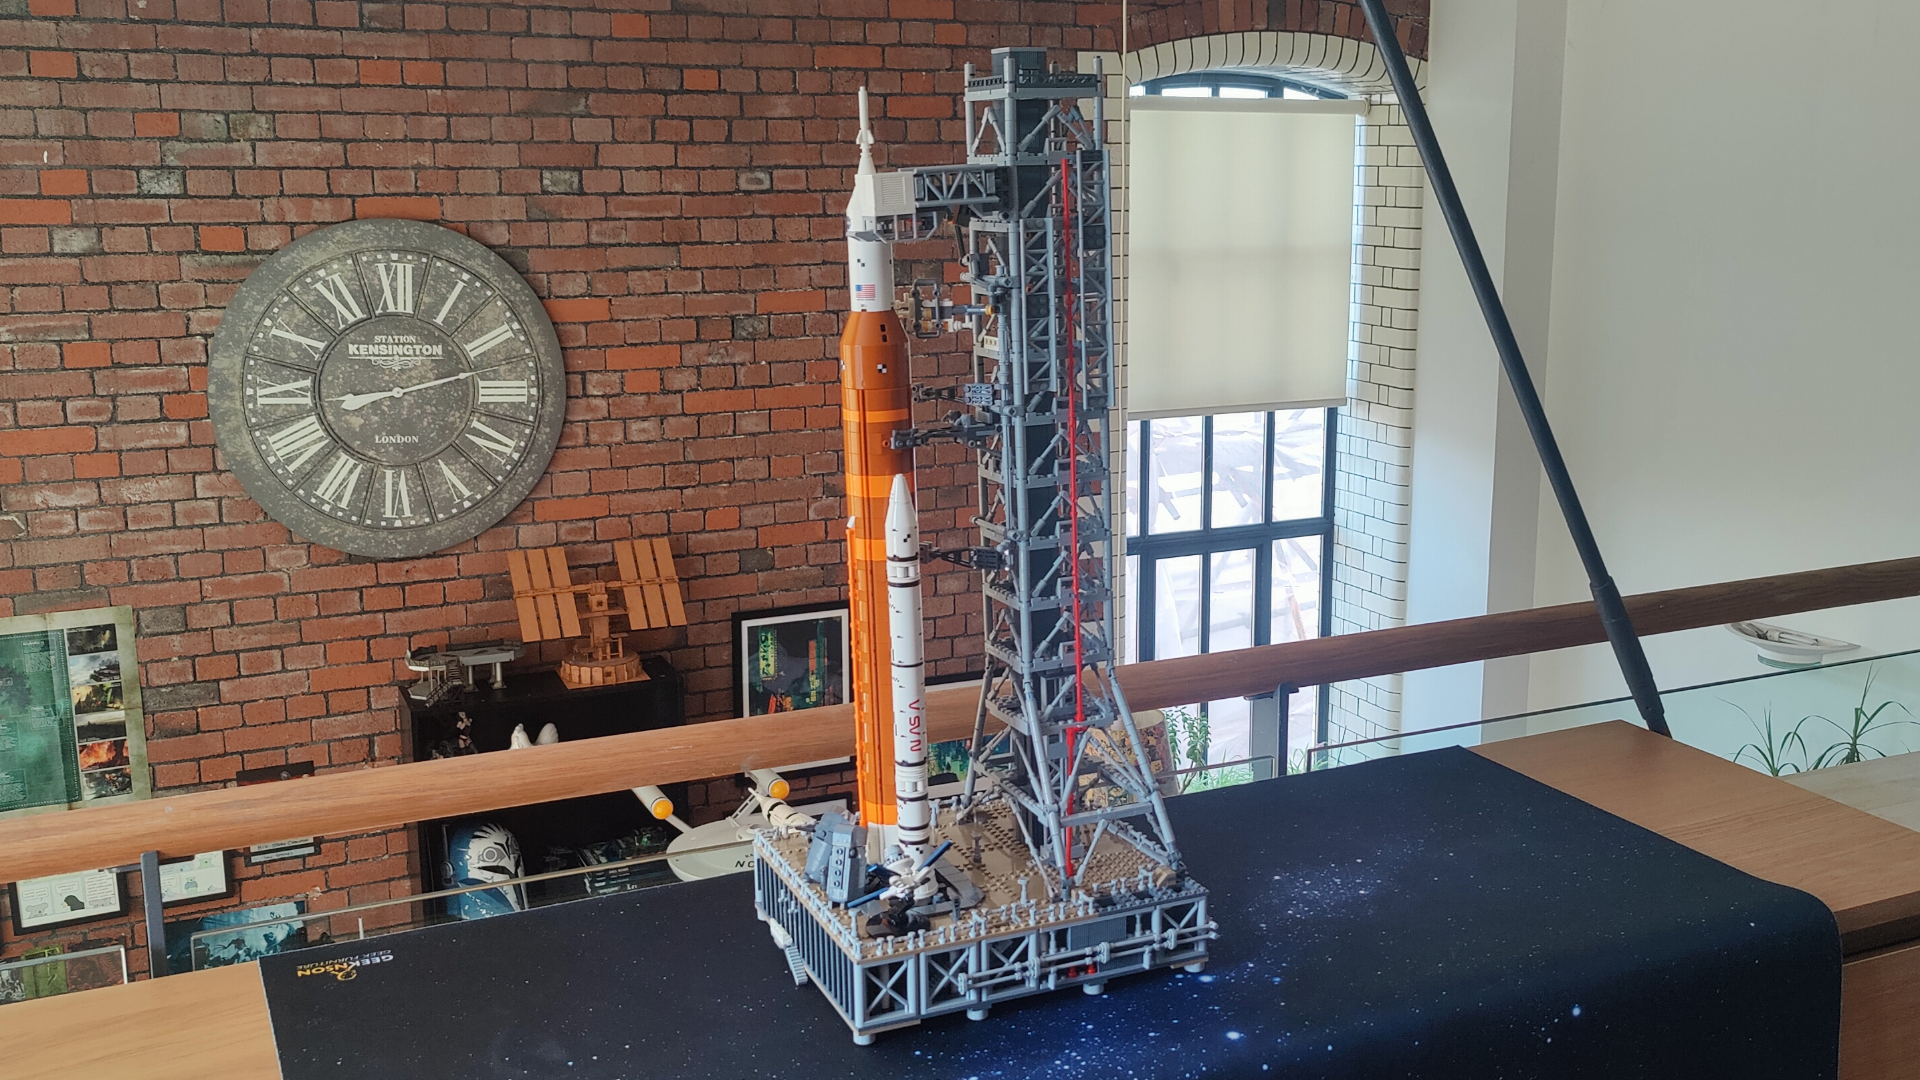  Lego NASA Artemis Space Launch System review 